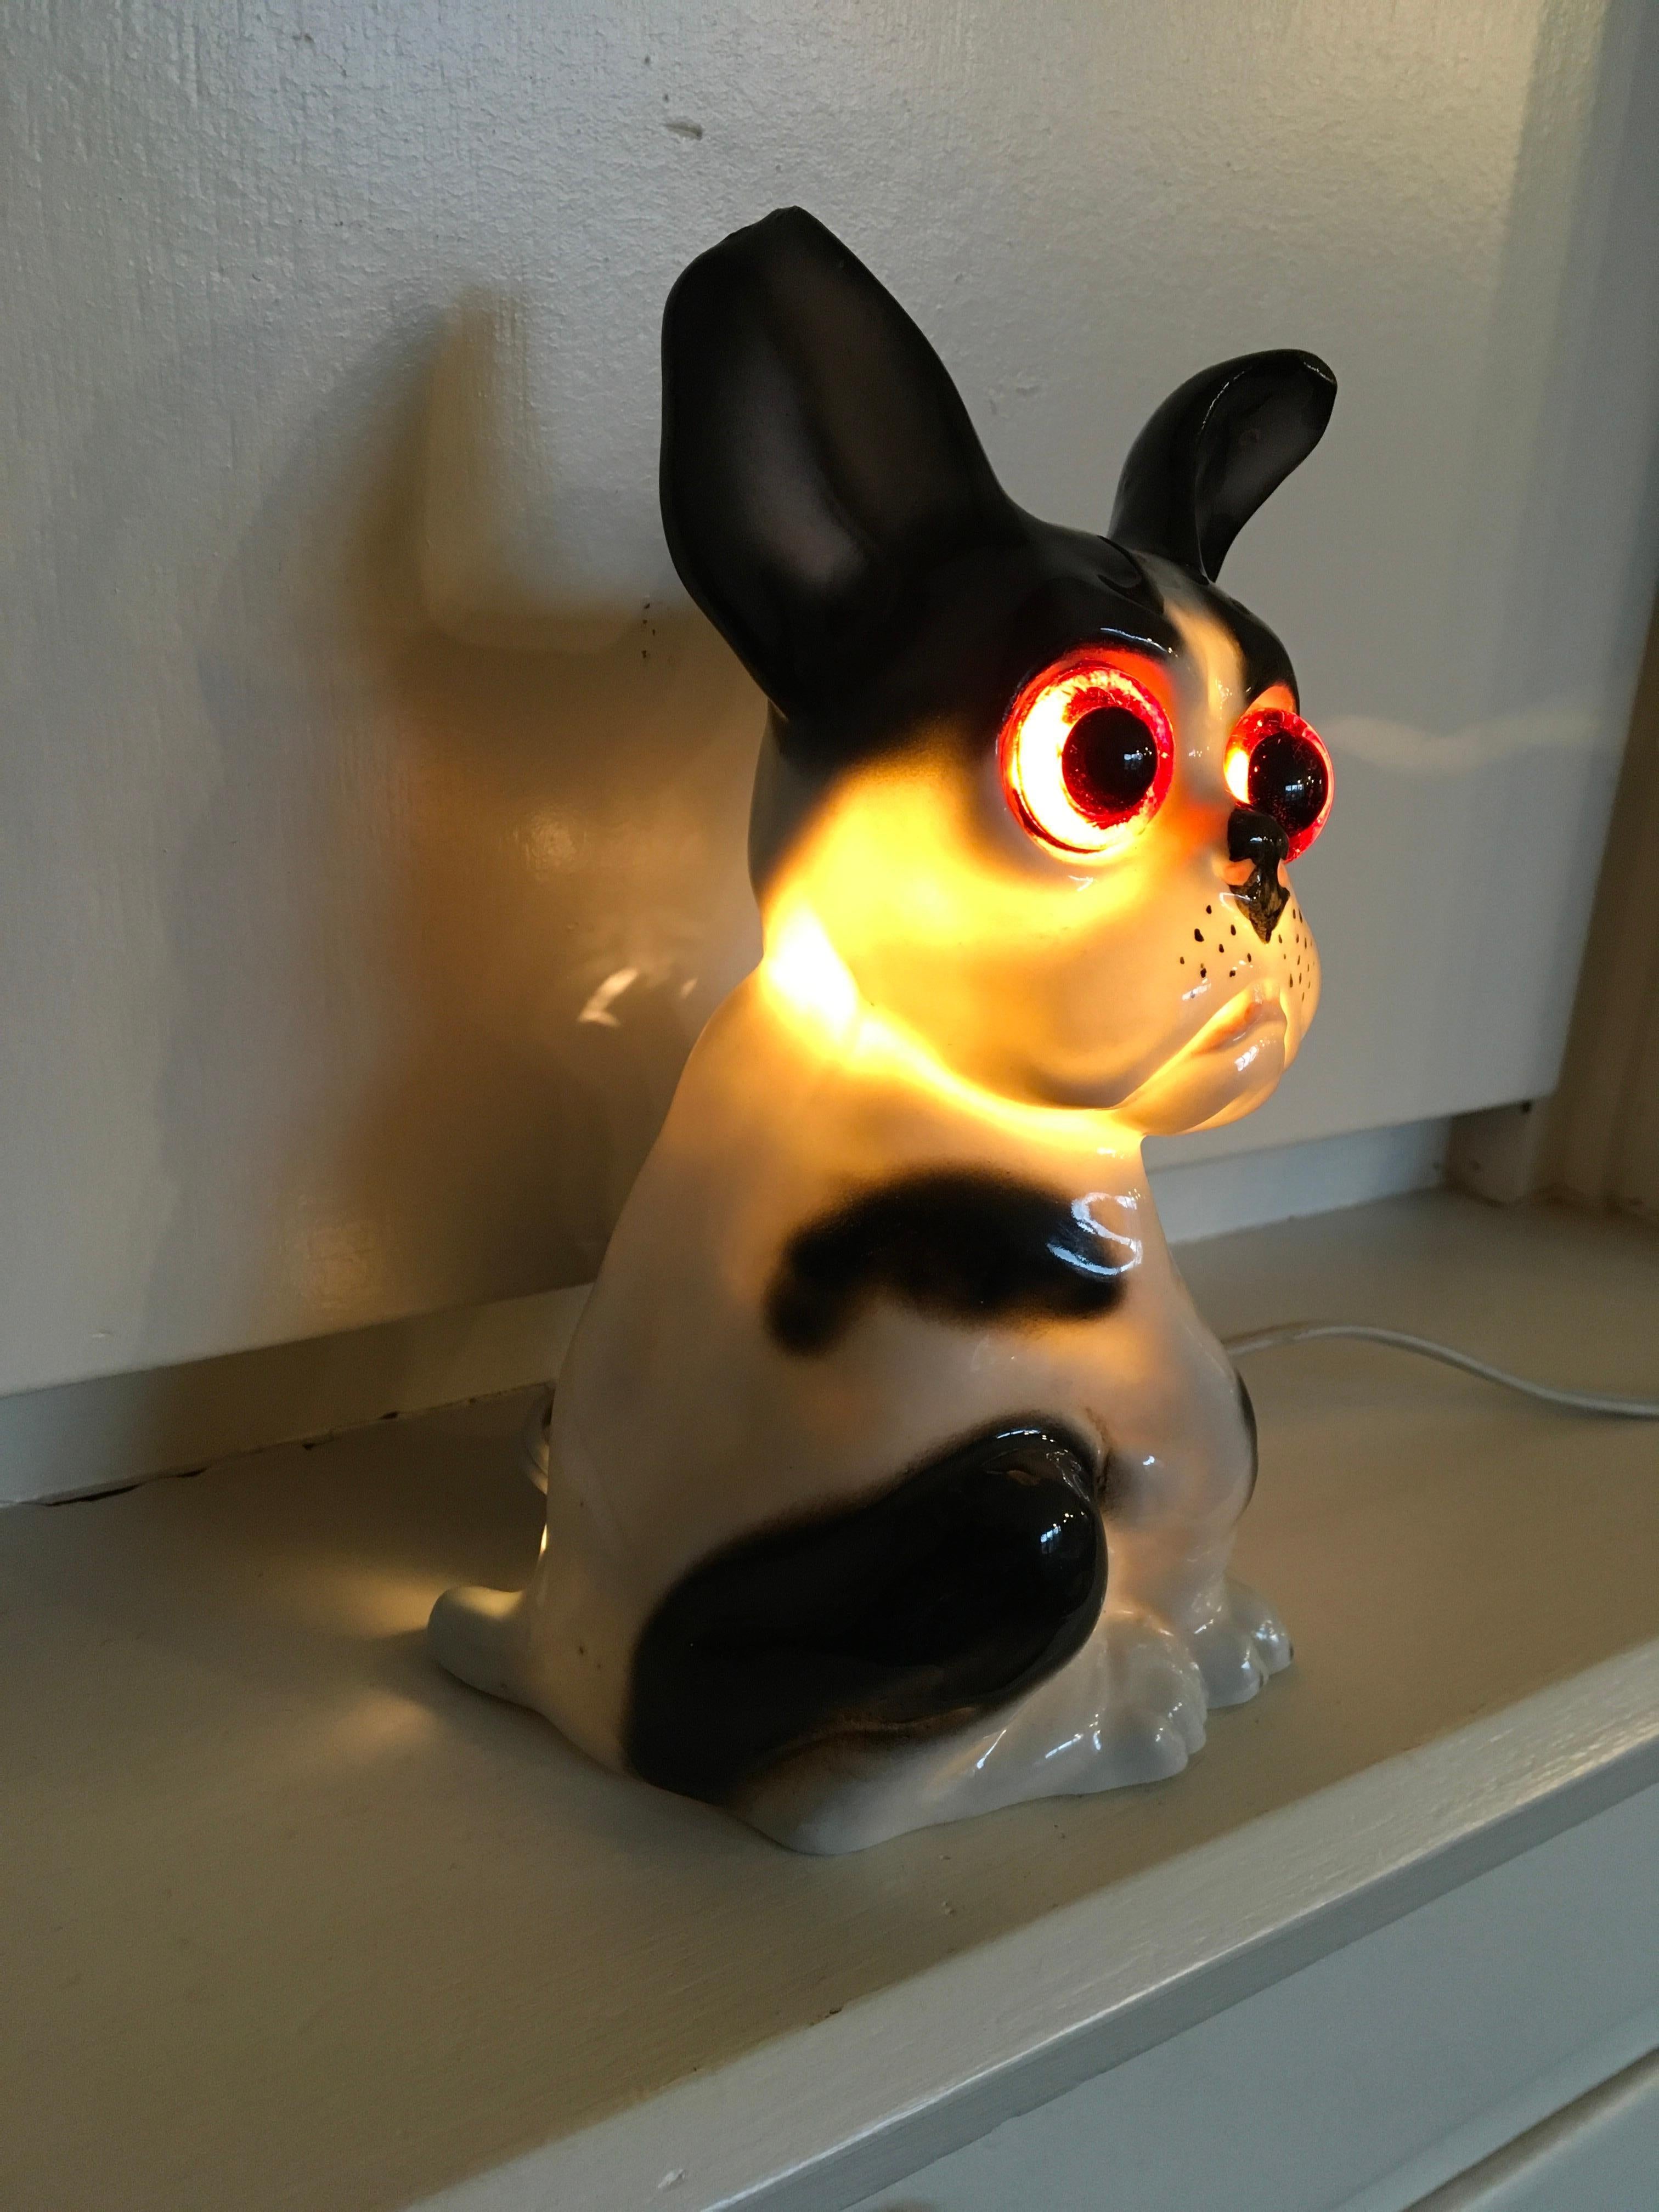 Art Deco Bulldog Perfume Lamp. 
This comical bulldog perfume light dates from the Art Deco period circa 1930s. 
It's a black and white sitting Frenchie dog, made of porcelain, with large glass orange eyes and light inside.
A collectable French